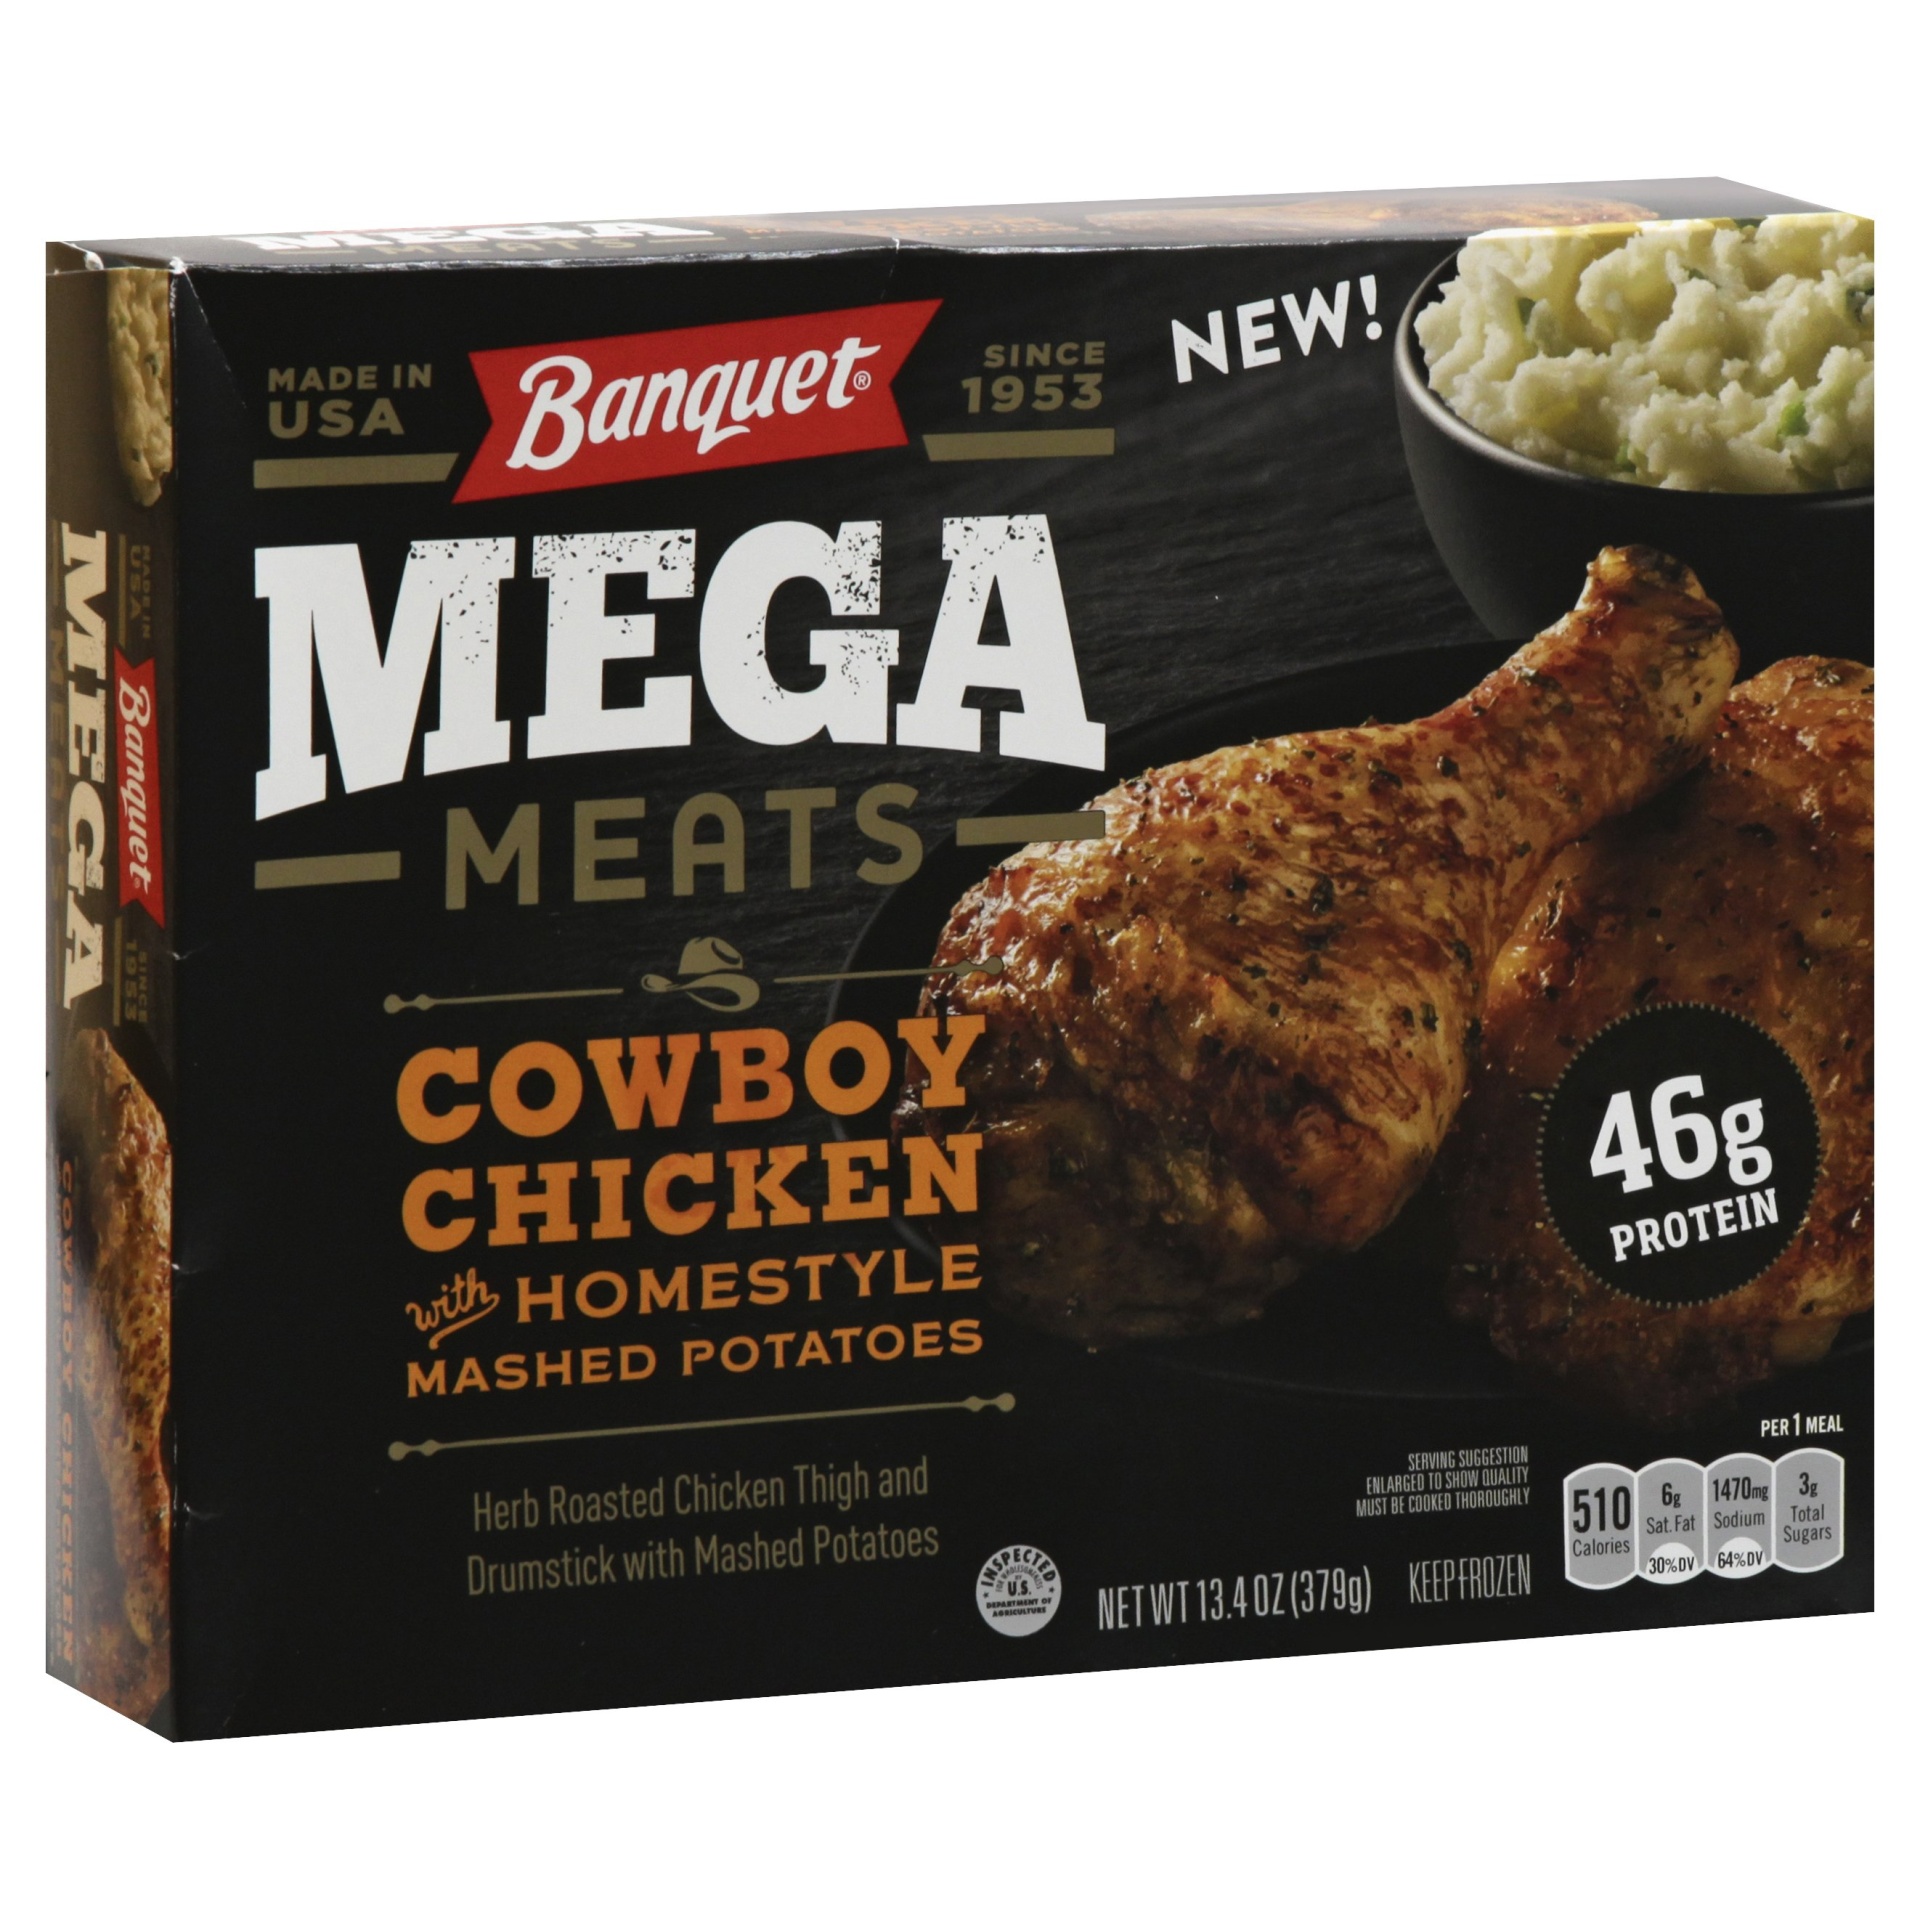 Banquet Mega Meats - Cowboy Chicken with Homestyle Mashed Potatoes 13.4 ...